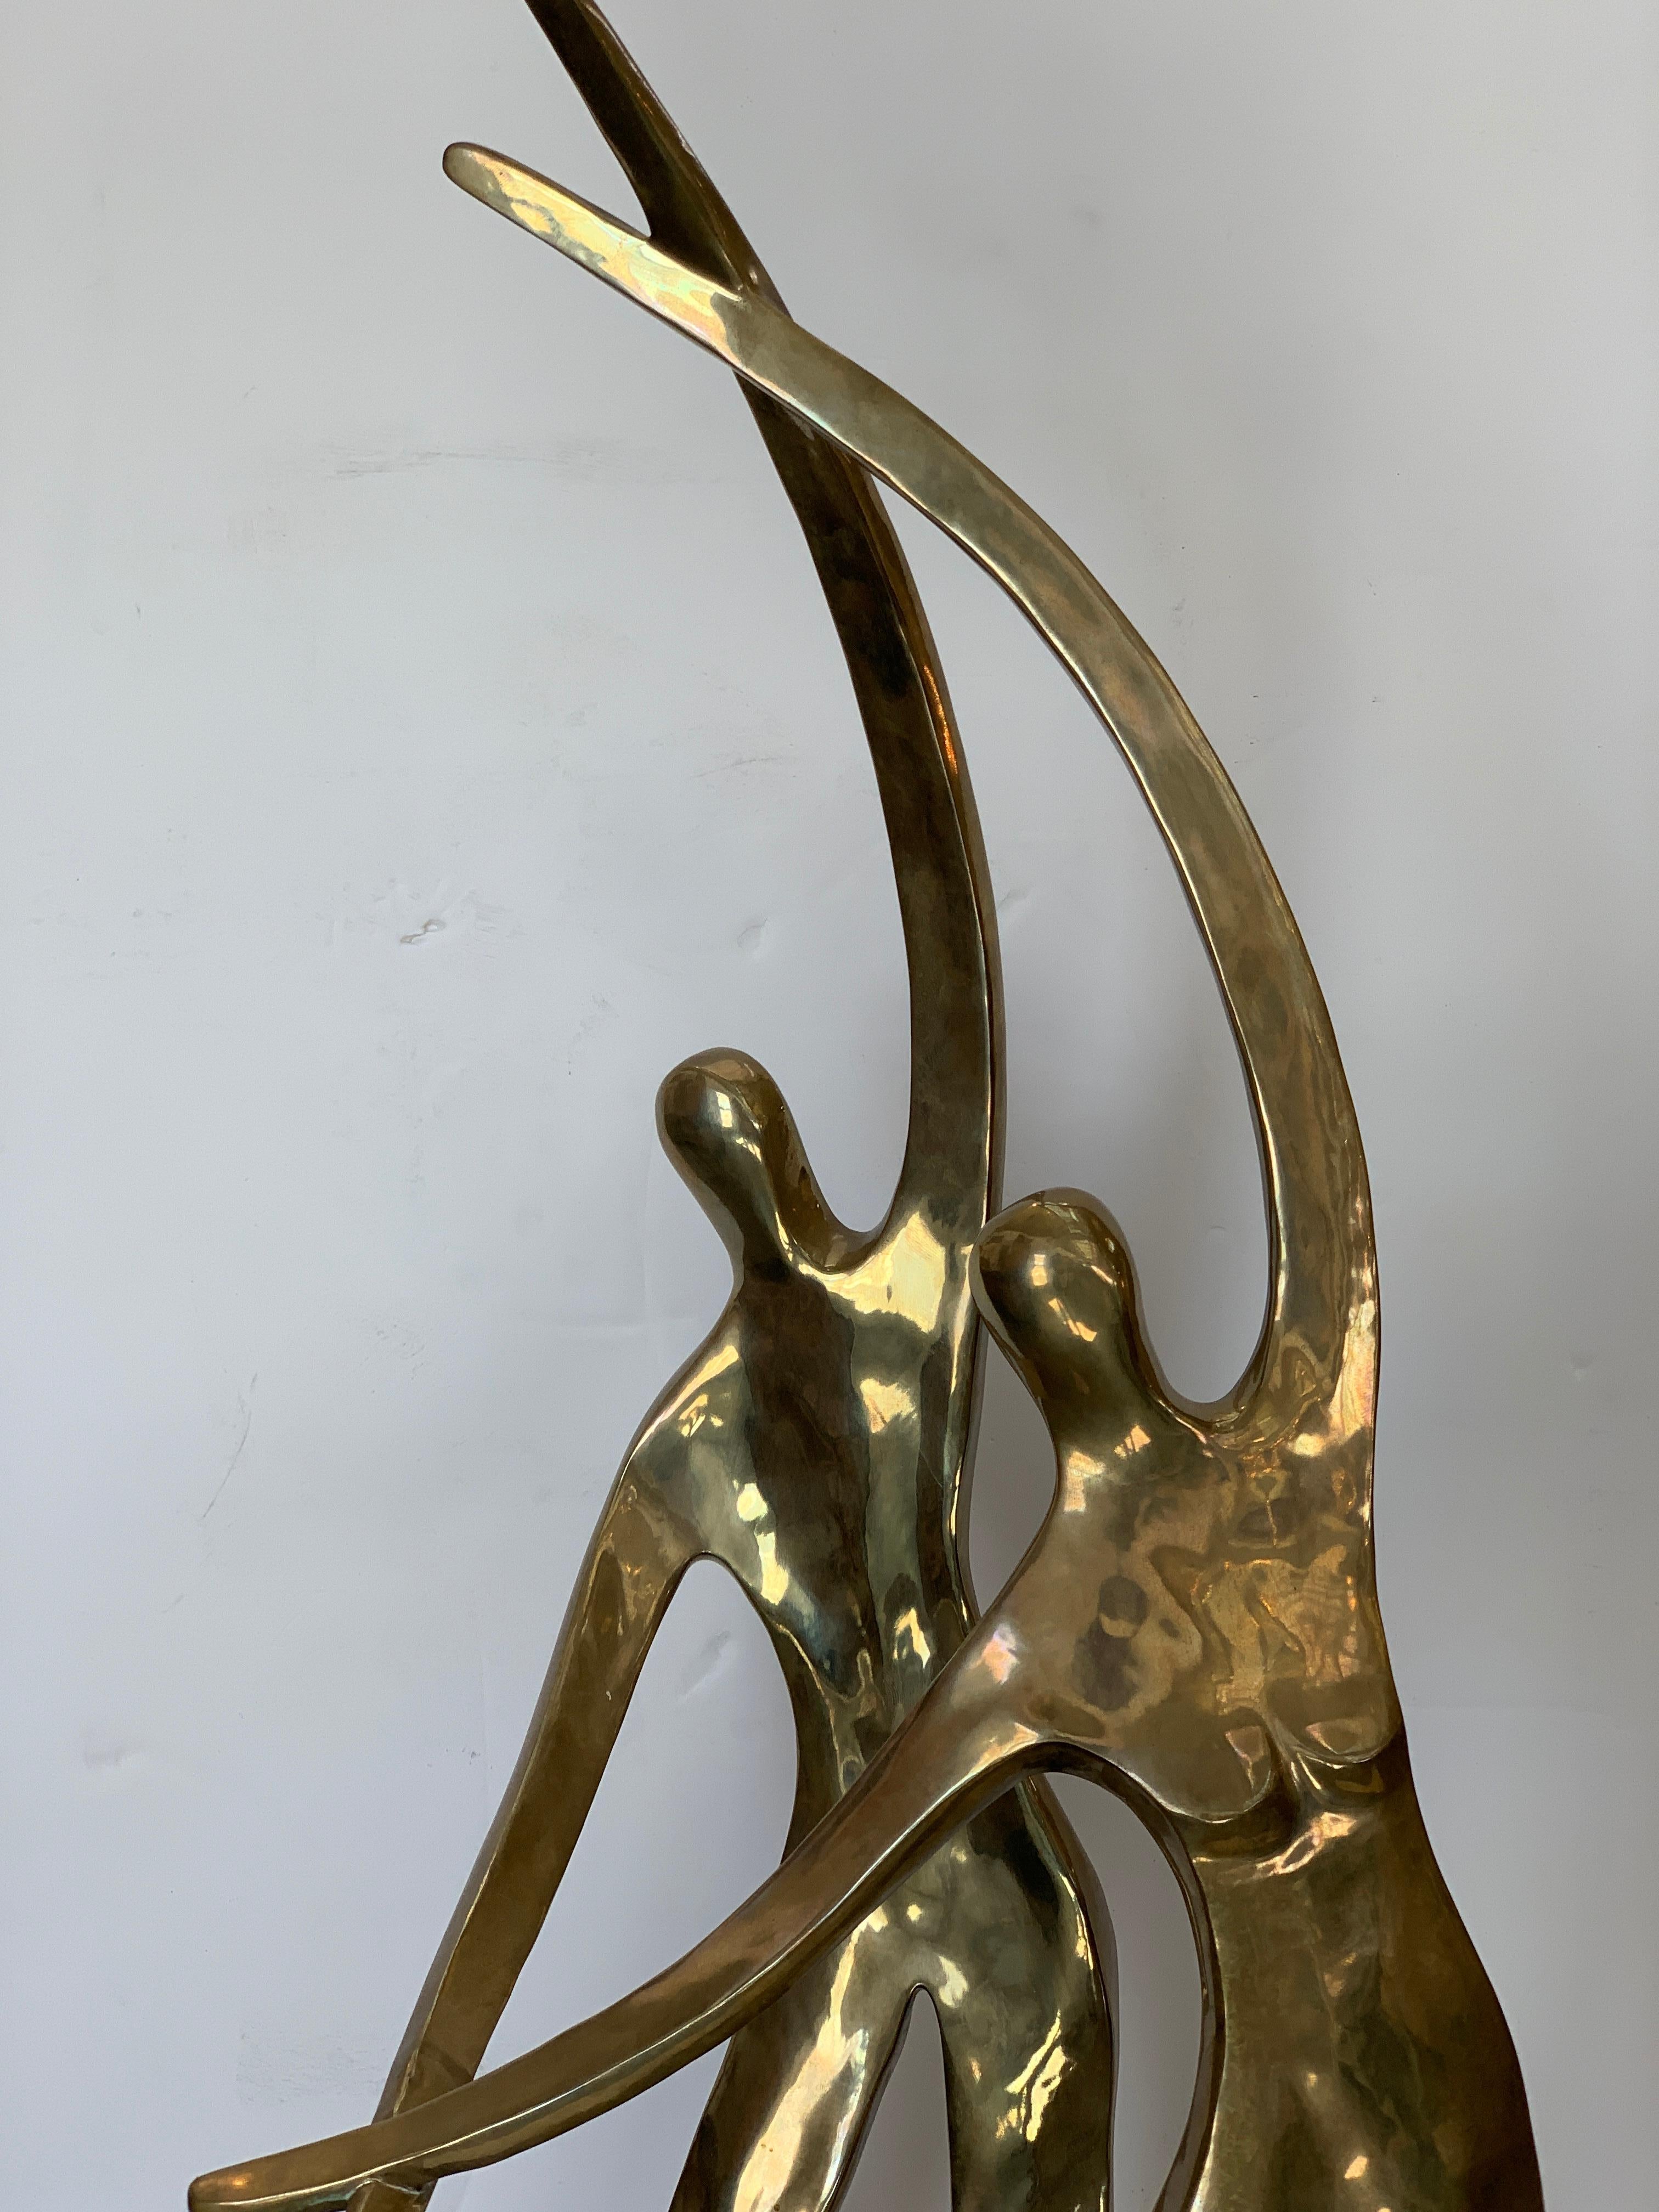 A large pretty polished bronze of a dancing couple from 1980 by the noted artist Gardner Locke. It is signed and dated 1980 also marked AP for artist's proof. On a stone or quartz base. There is a corner that has been rounded smooth, detailed in a